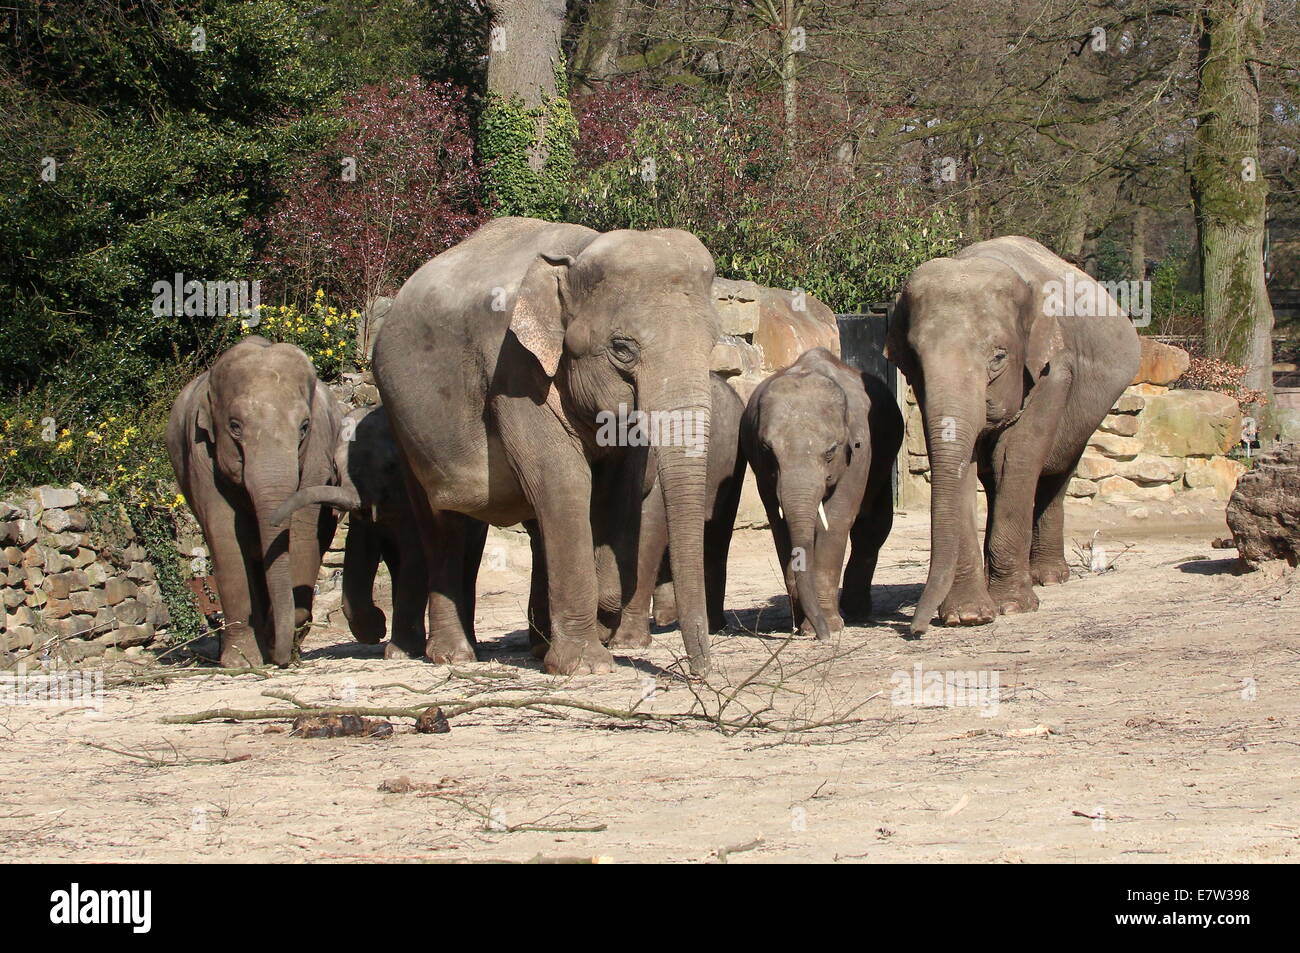 Group of 6 Asian elephant (Elephas maximus)  at Dierenpark Emmen Zoo, The Netherlands Stock Photo